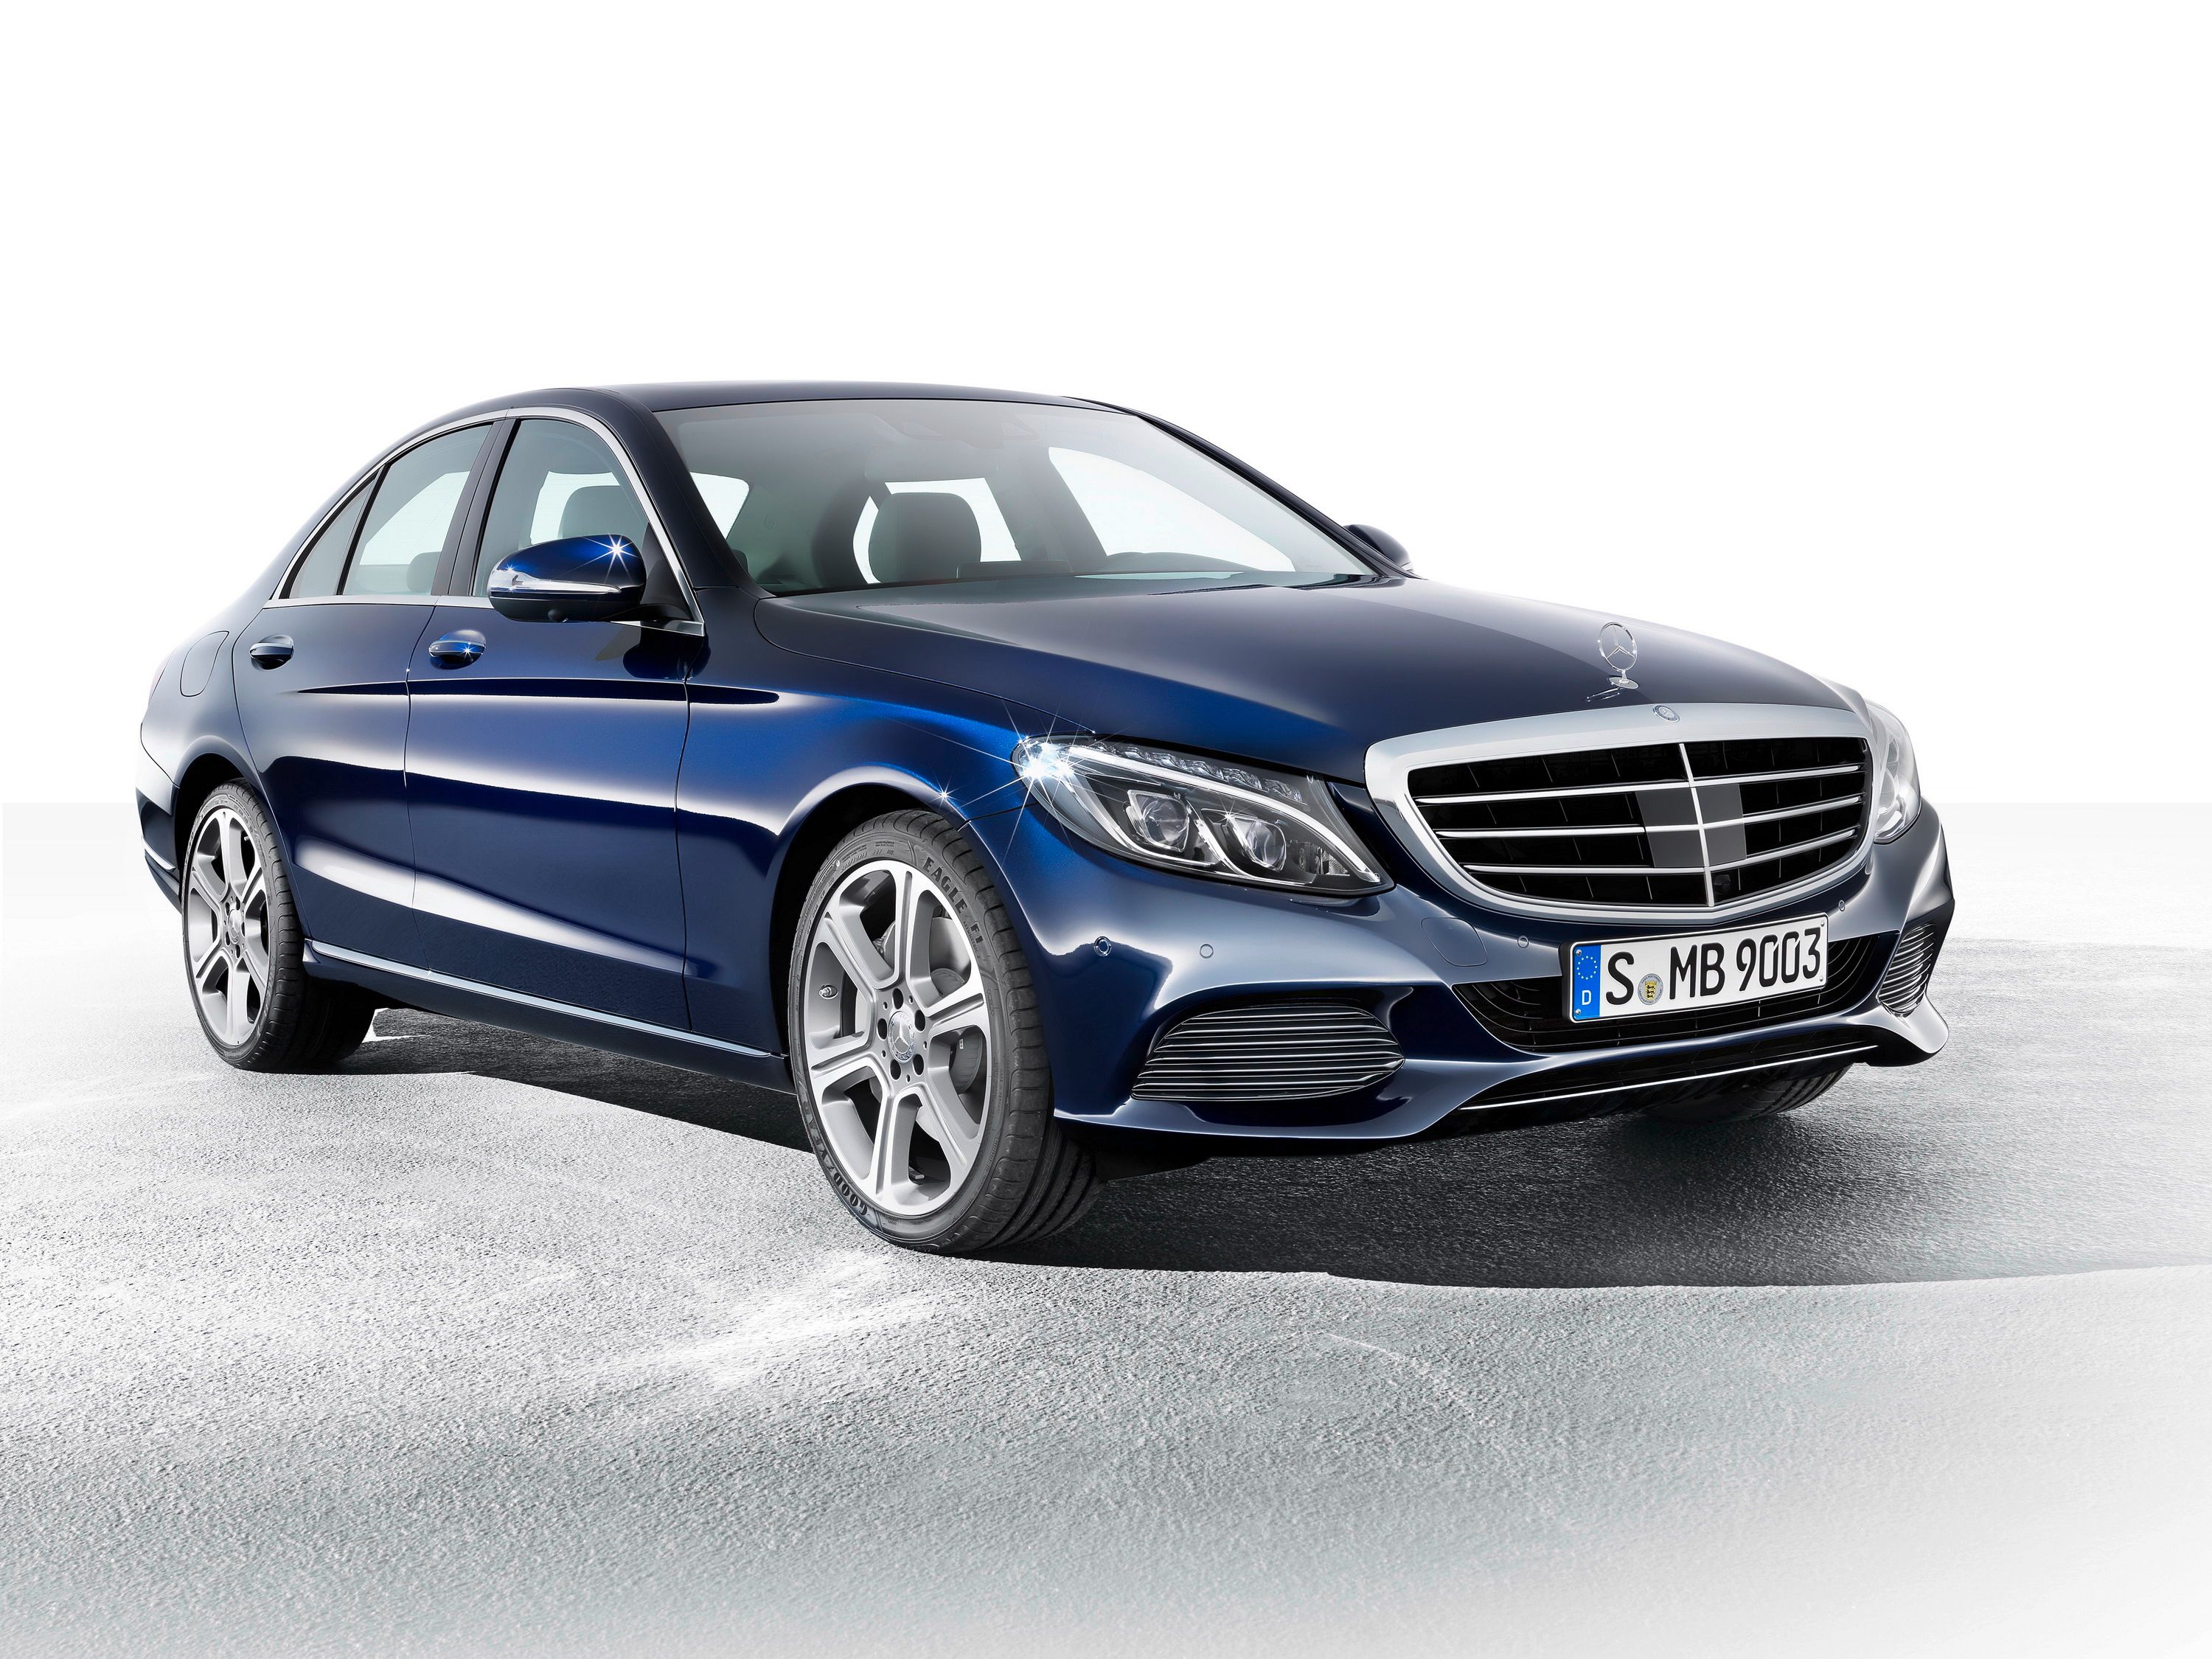 2015 Mercedes C-Class Could Get a Four-Door Coupe Variant